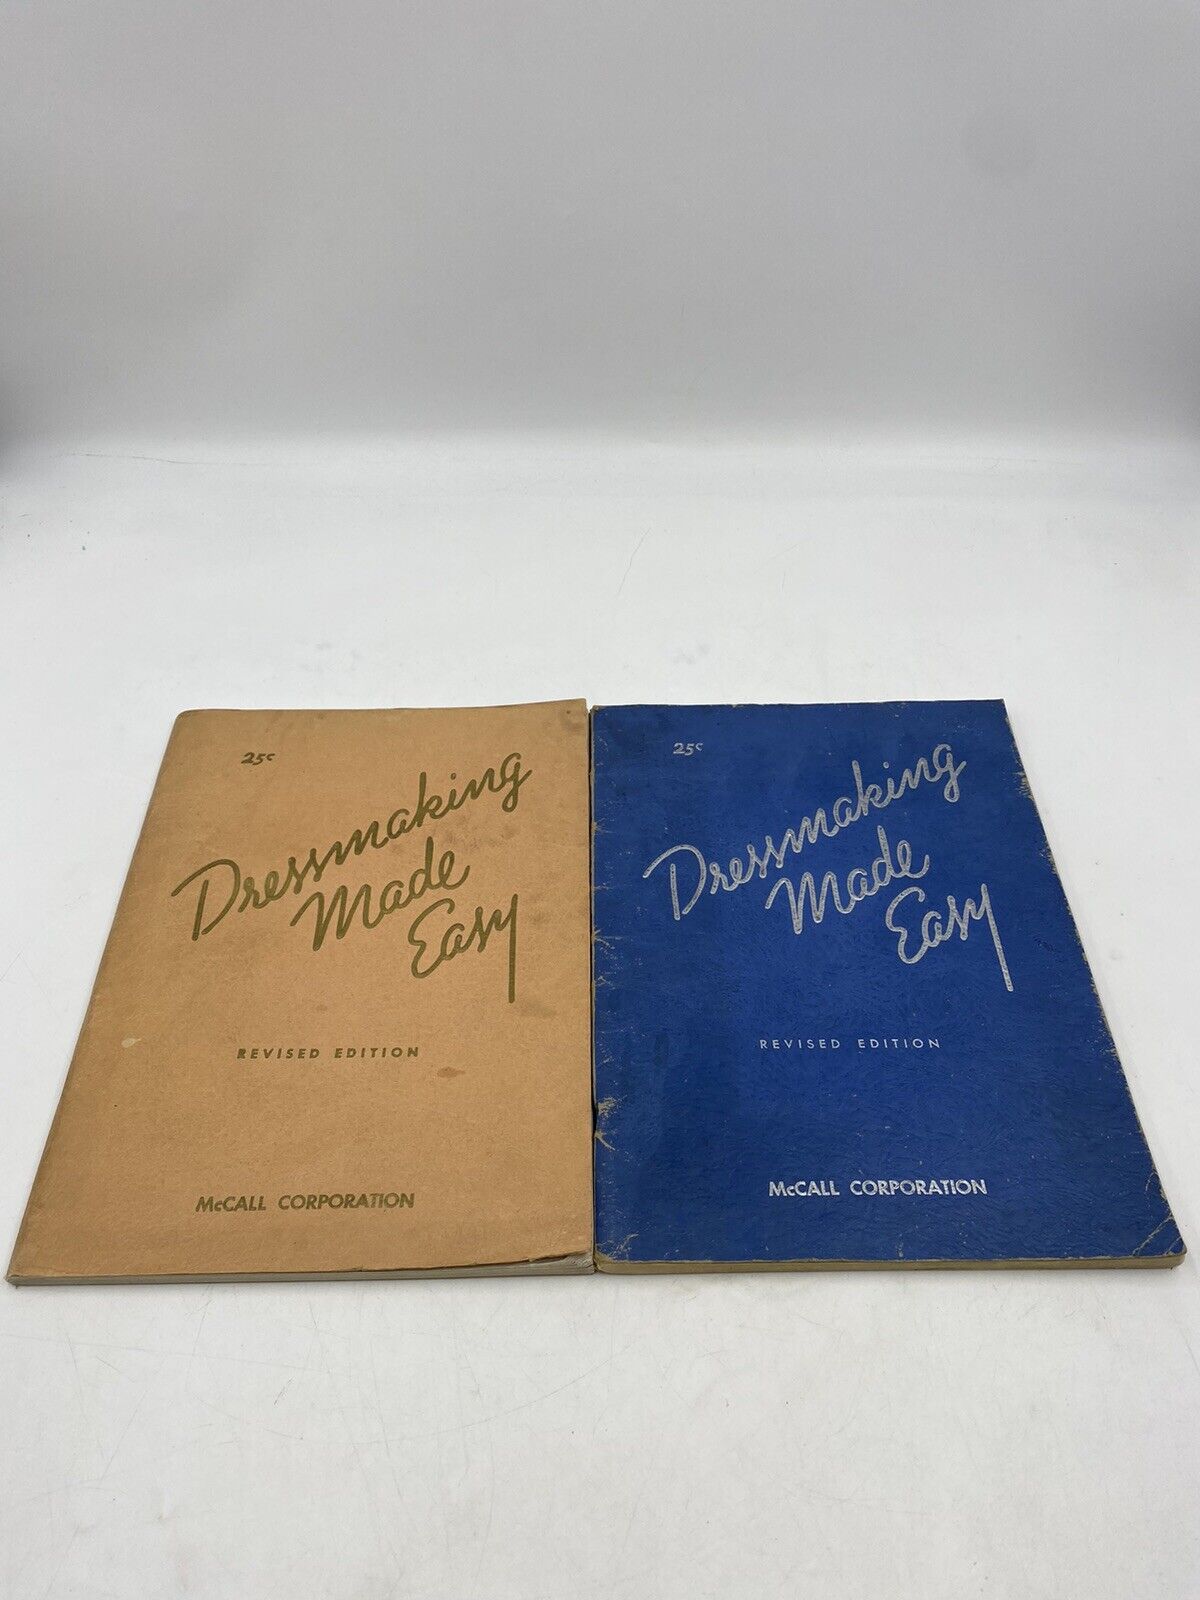 Vintage McCall Dressmaking Made Easy Revised Edition, 1939 & 1943 Book, Lot Of 2